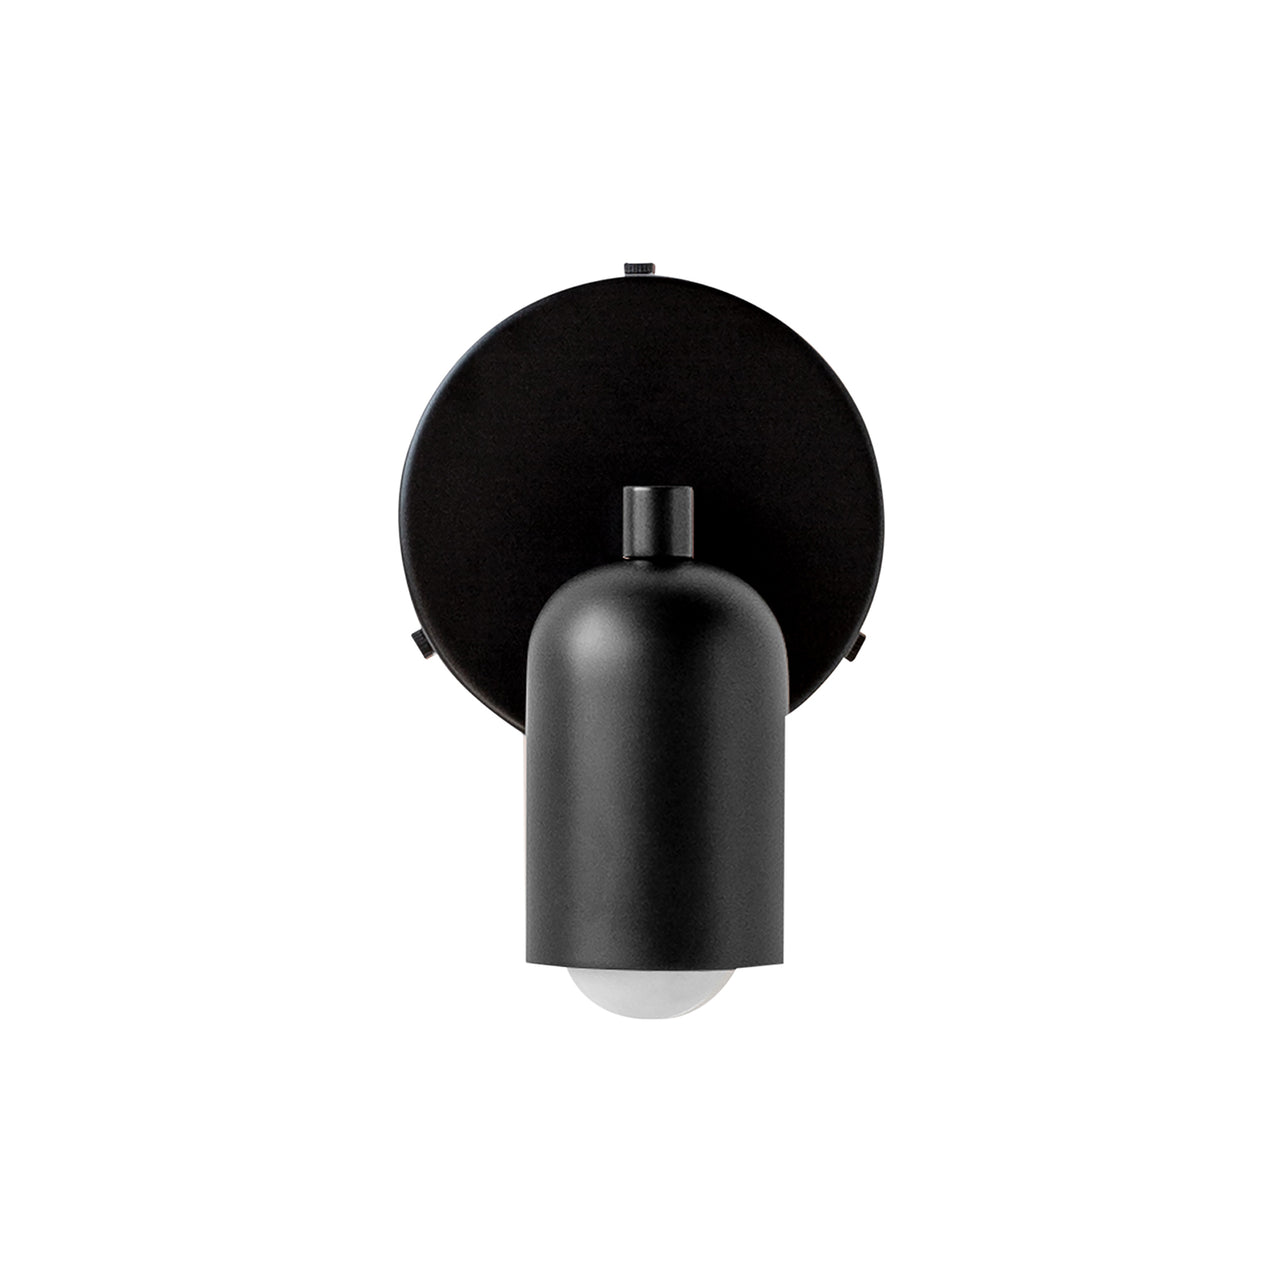 Fixed Down Sconce: Black + Without Switch